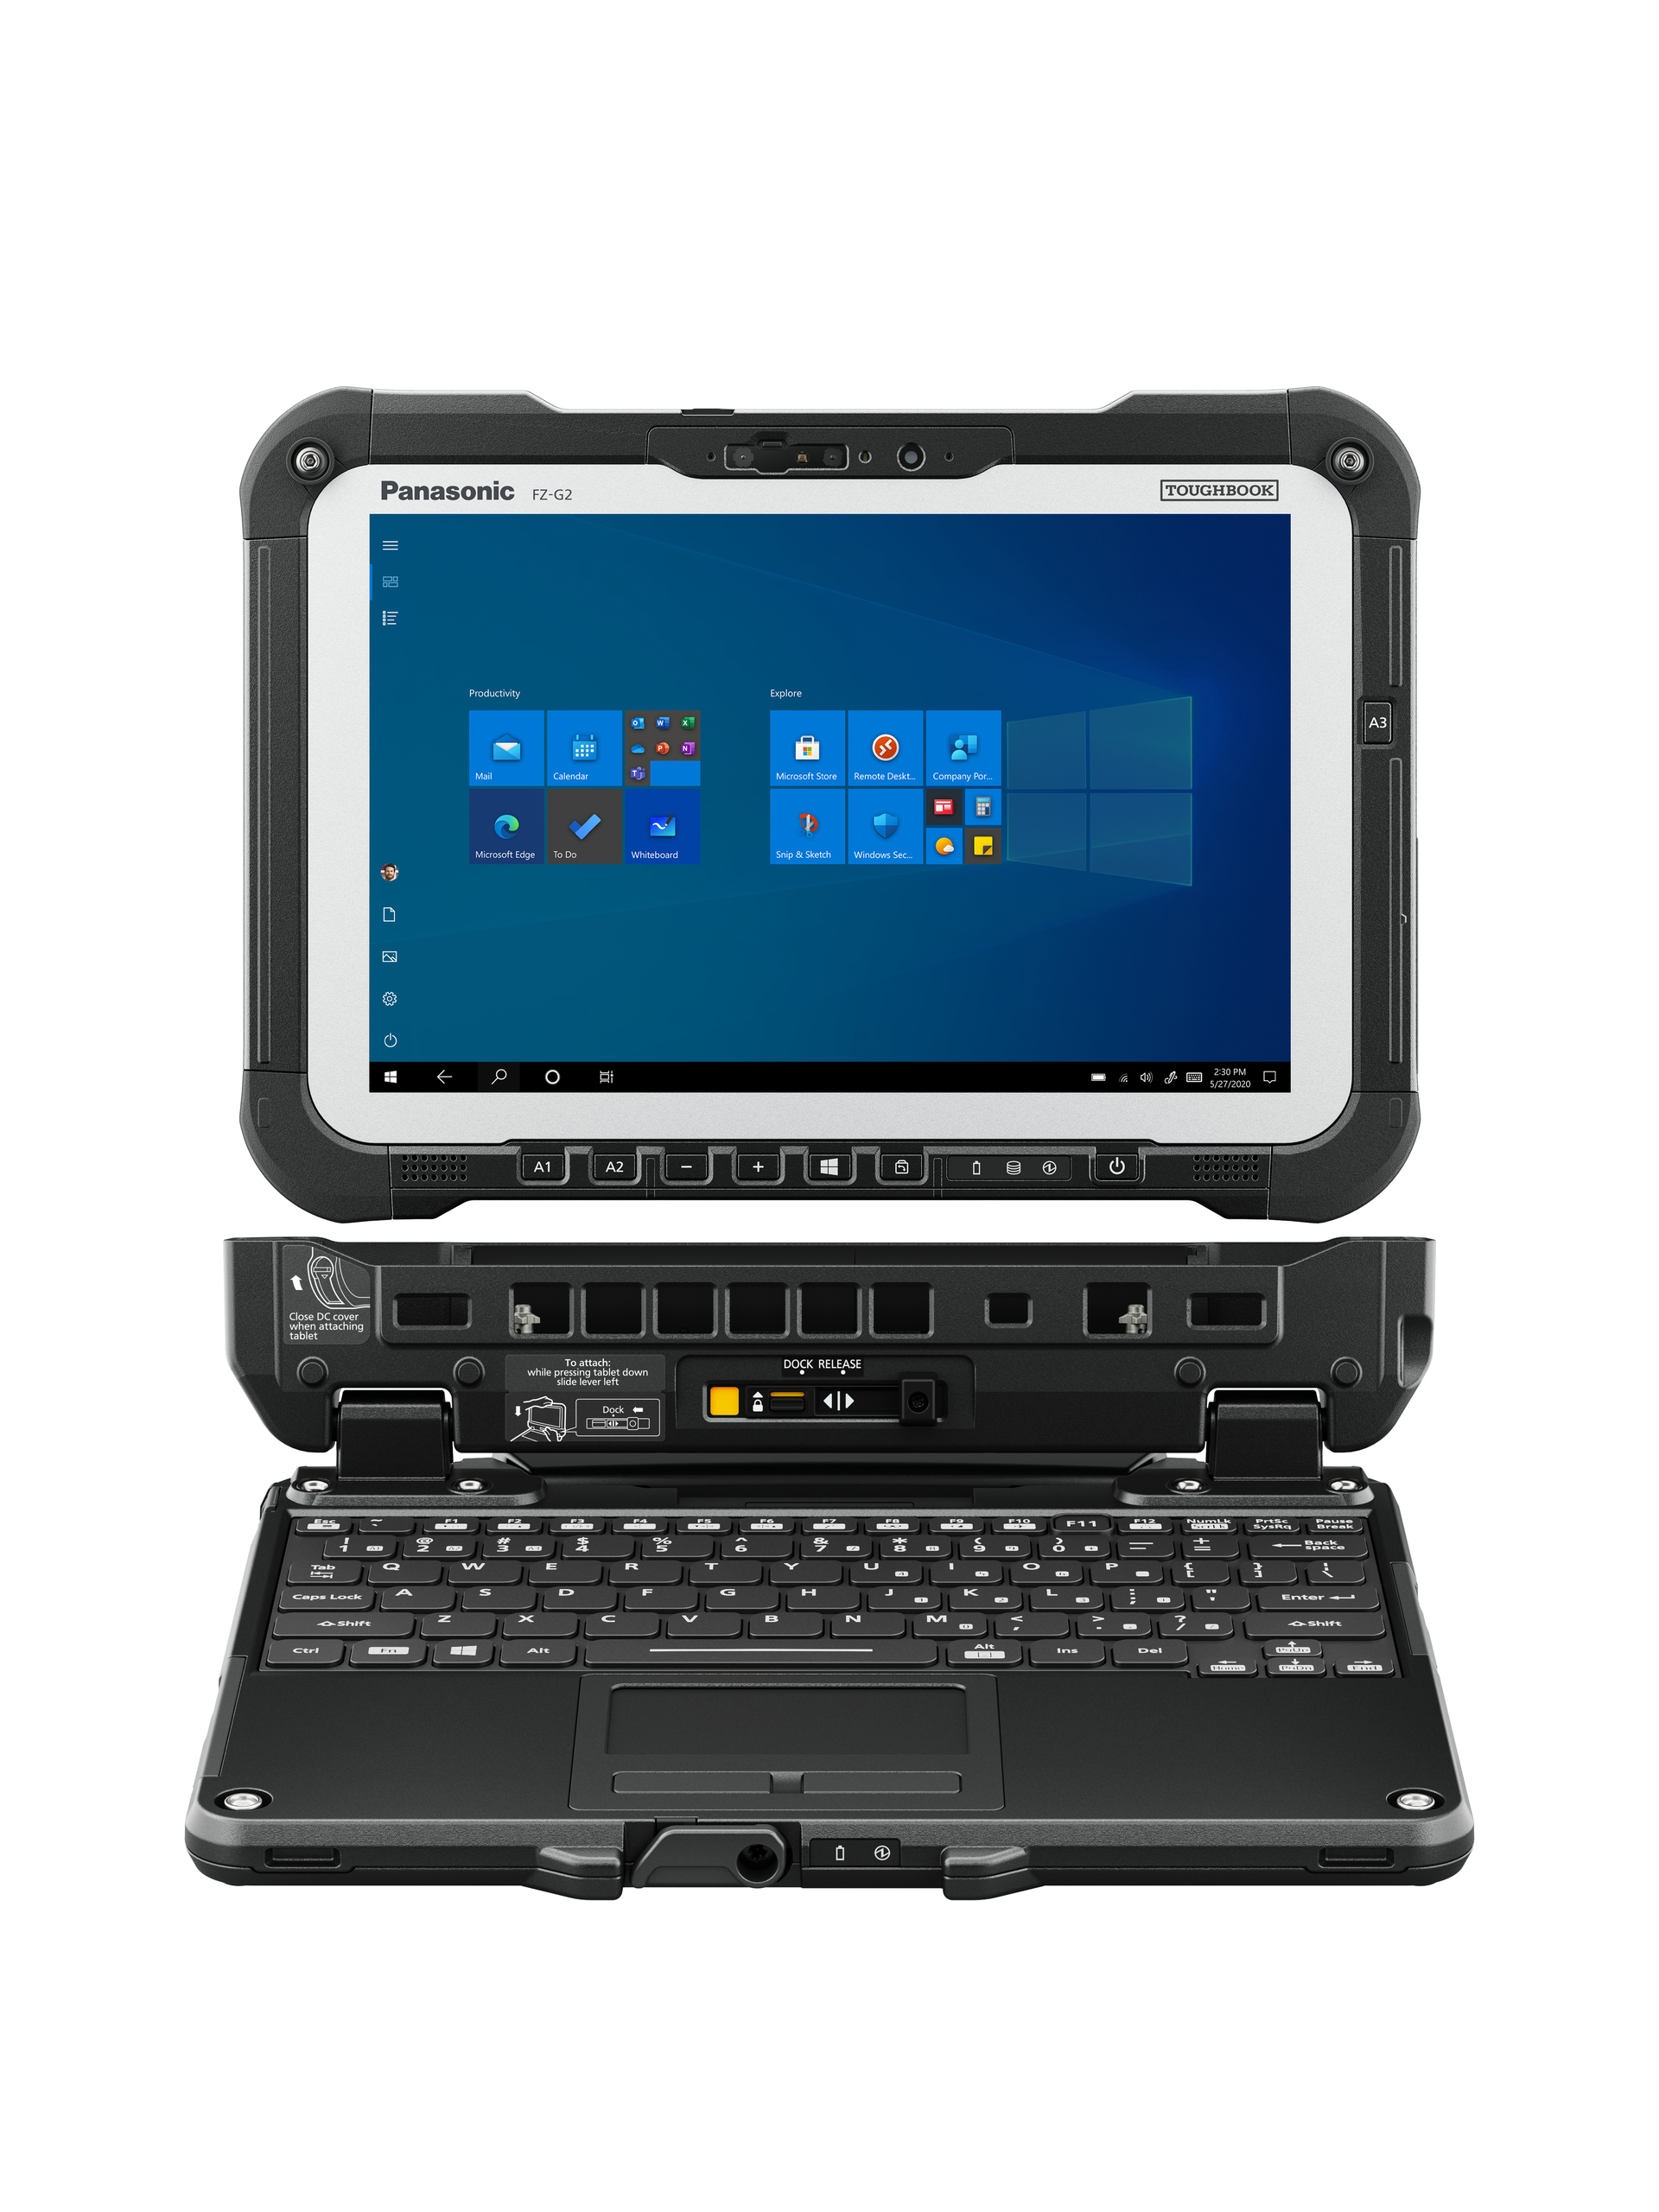 The Panasonic Toughbook G2 can be operated solely in tablet form or be paired with a keyboard.